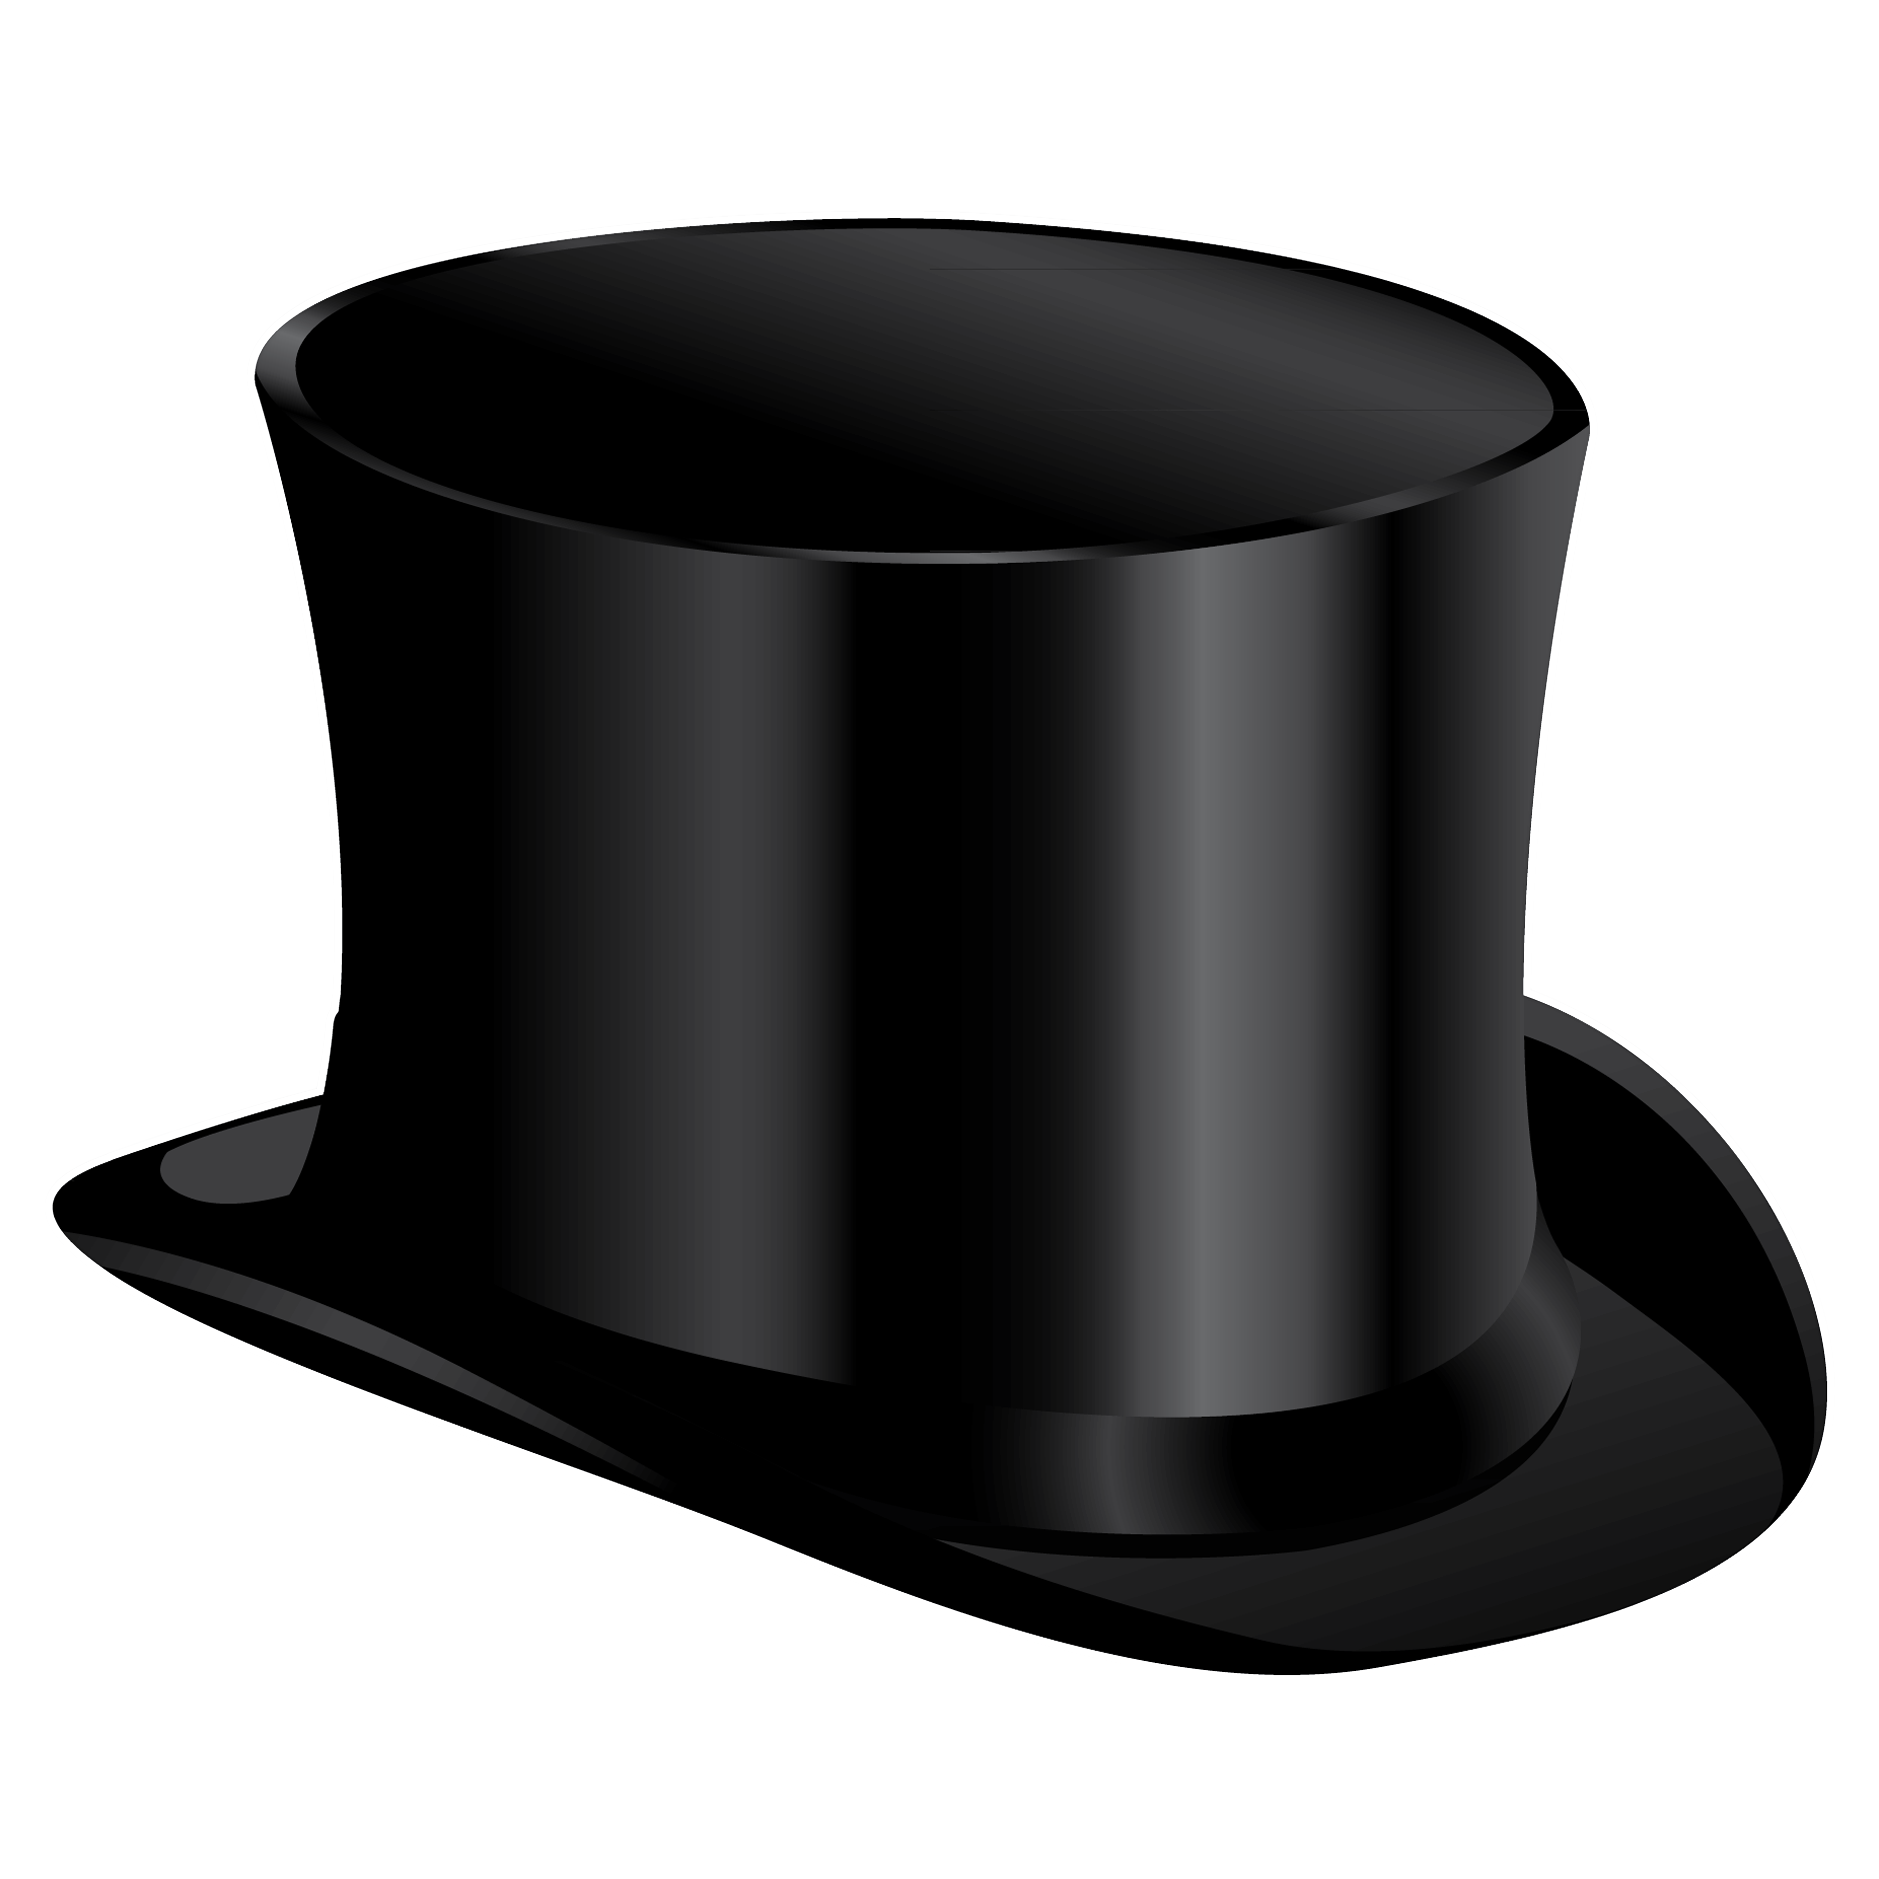 High Quality Top hat Blank Meme Template